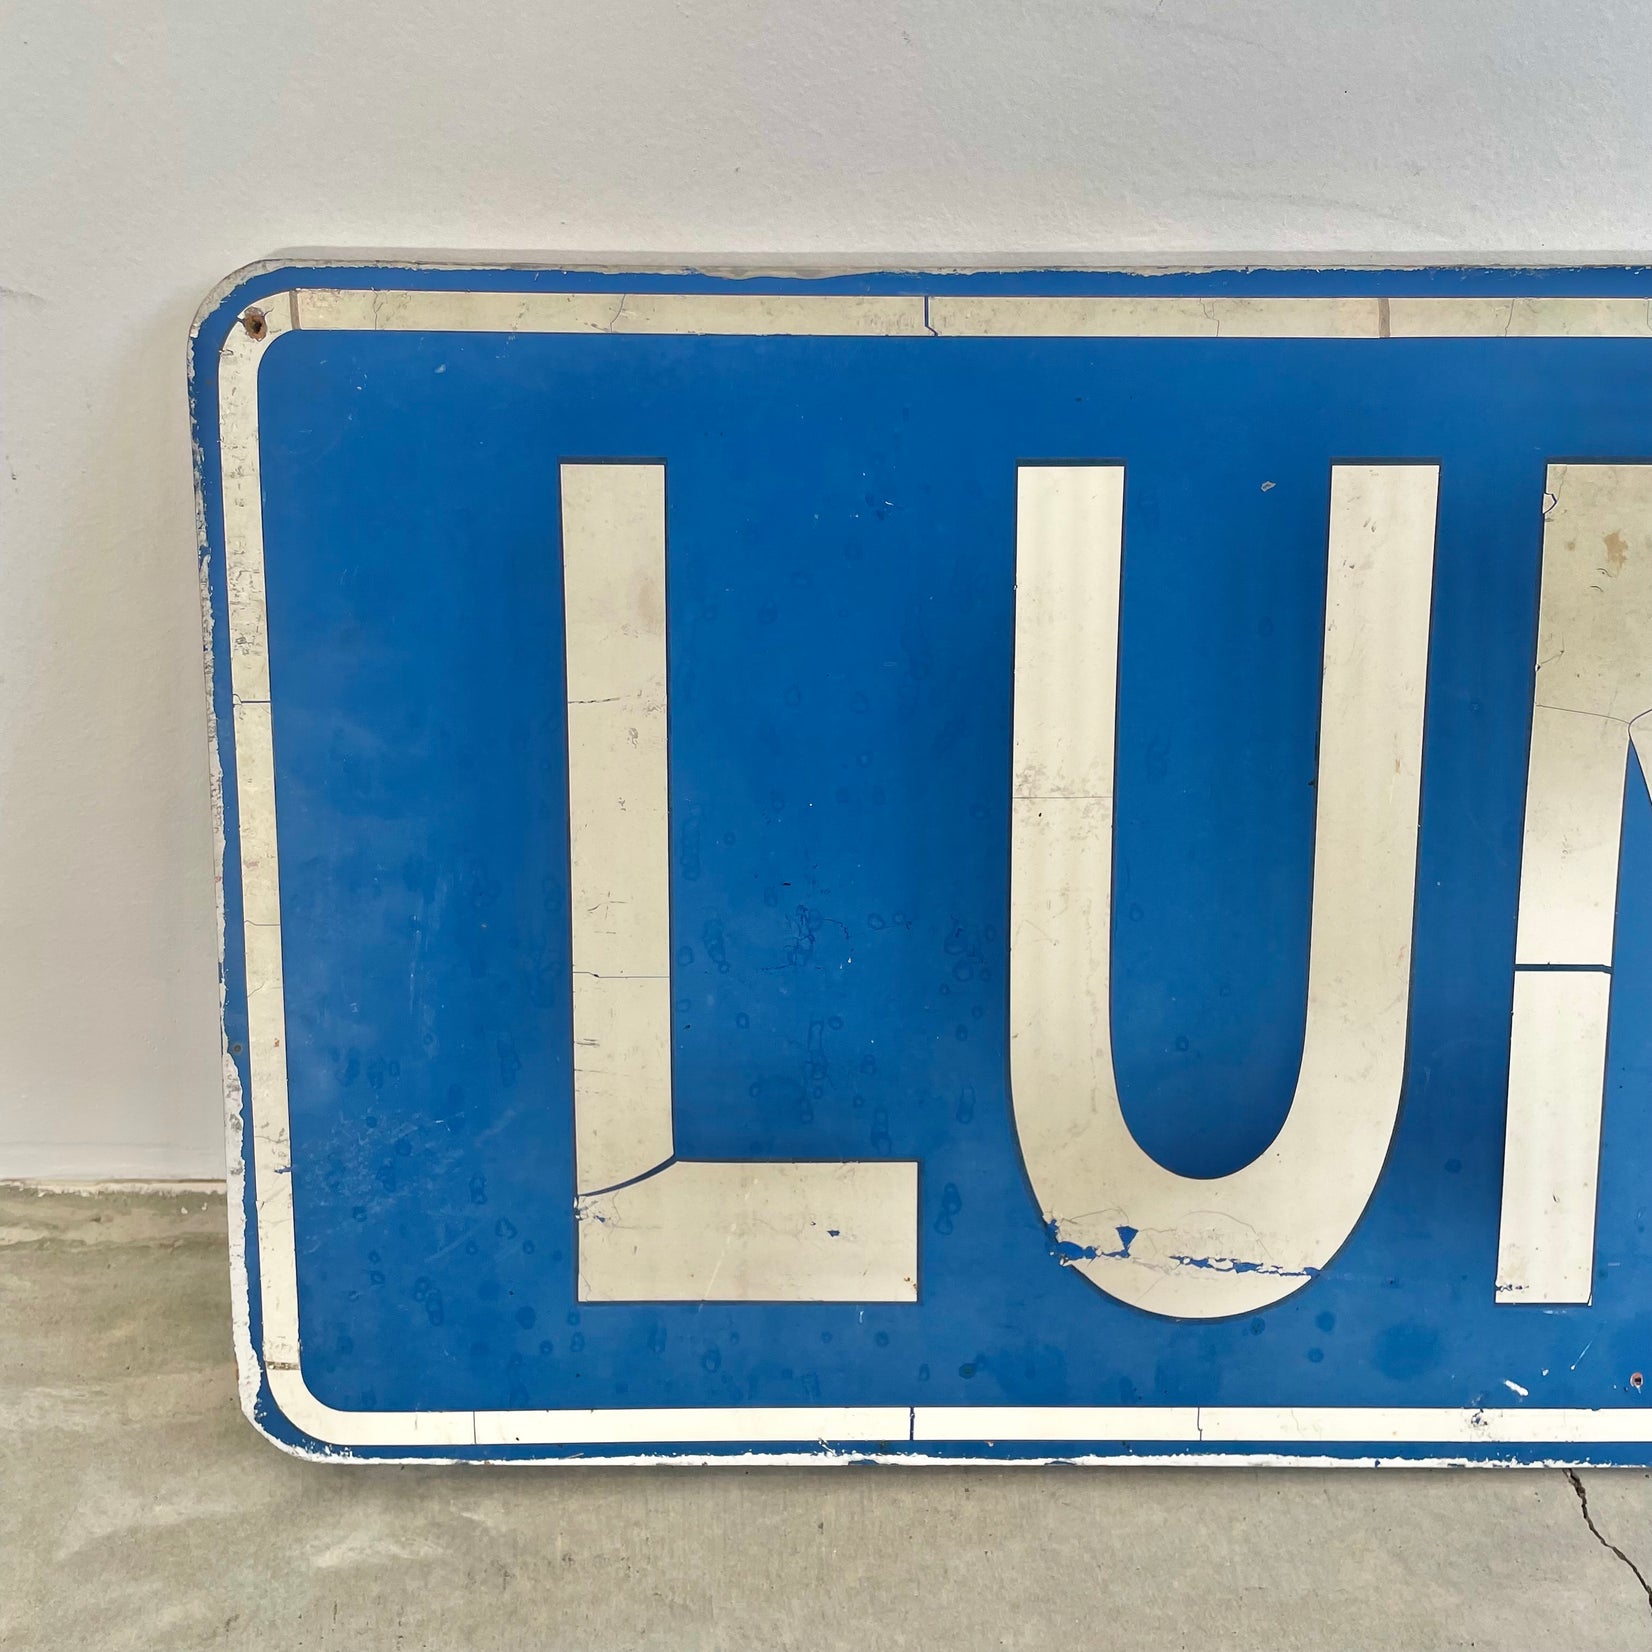 Wood 'Lunch' Sign, 1980s USA